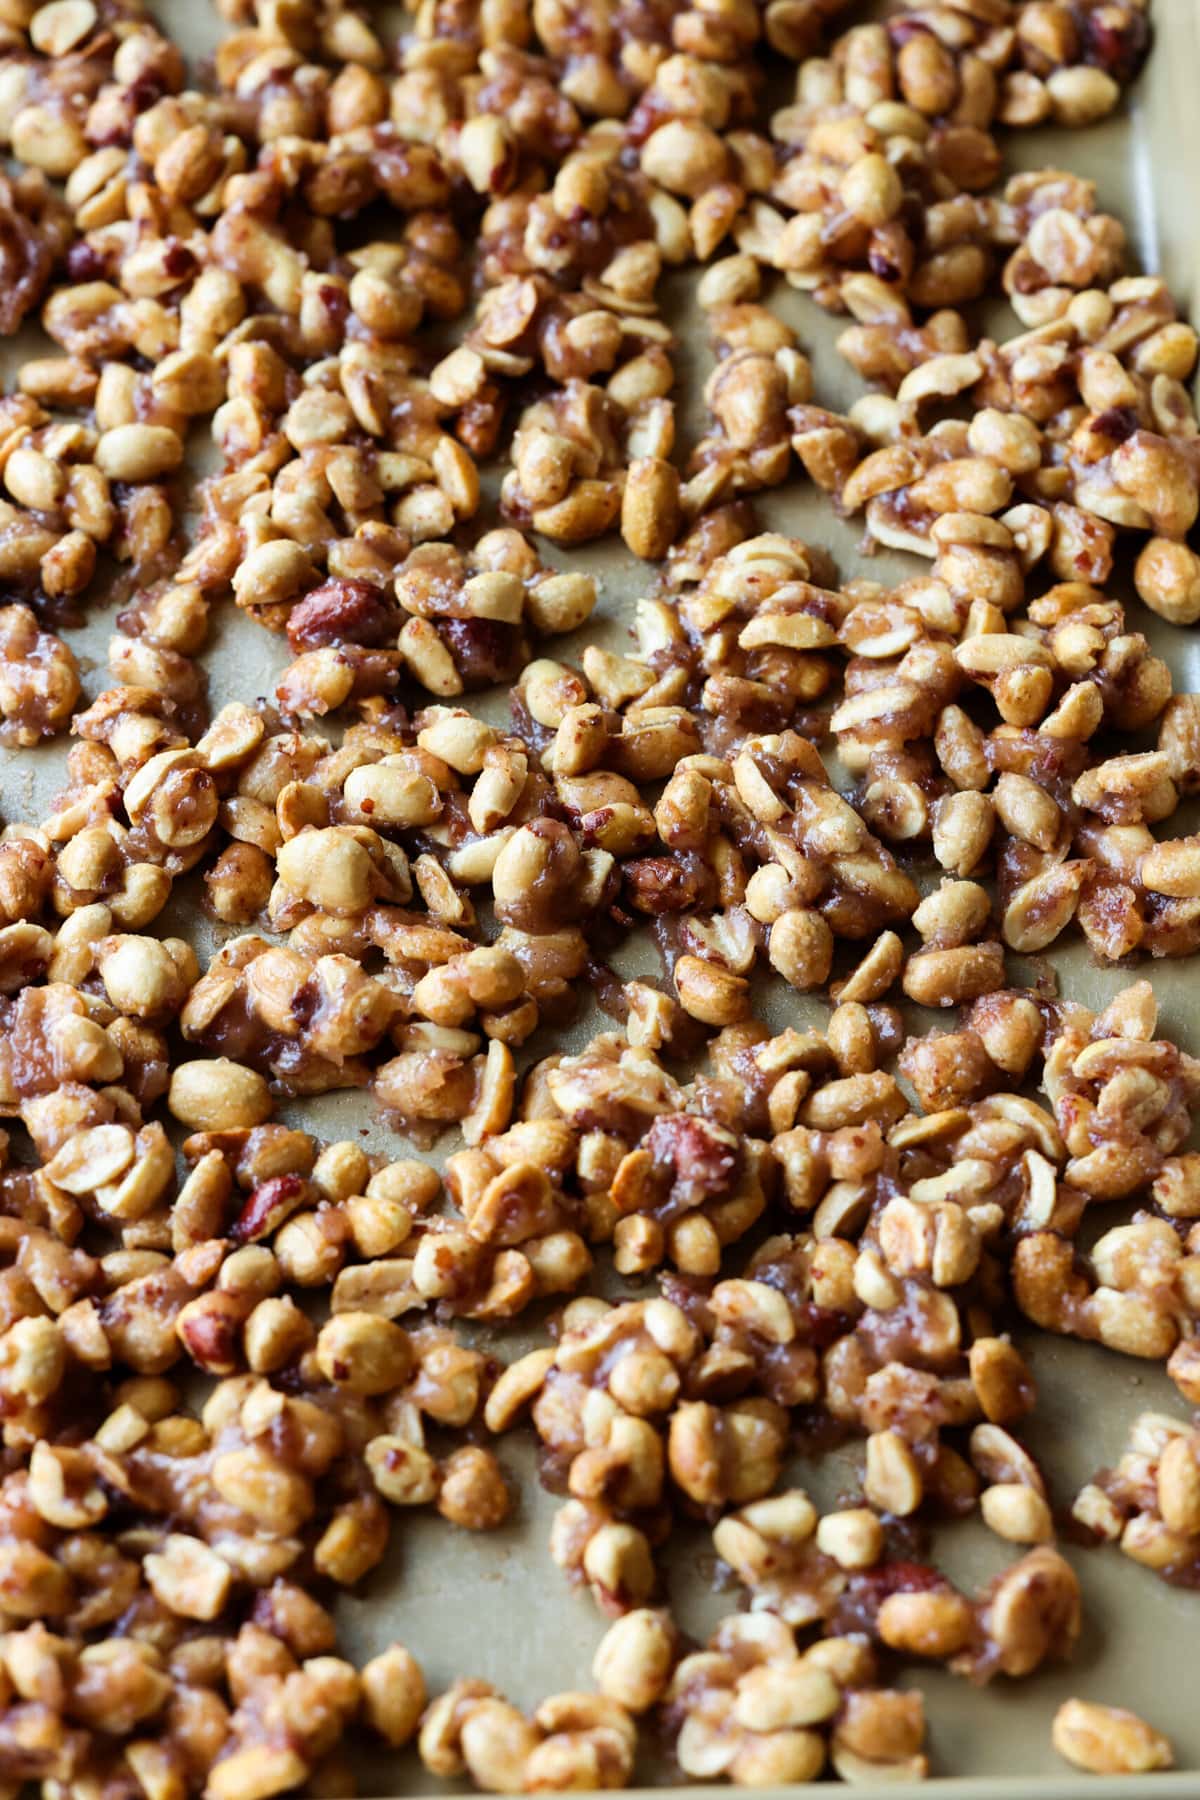 Toffee peanuts on a baking sheet